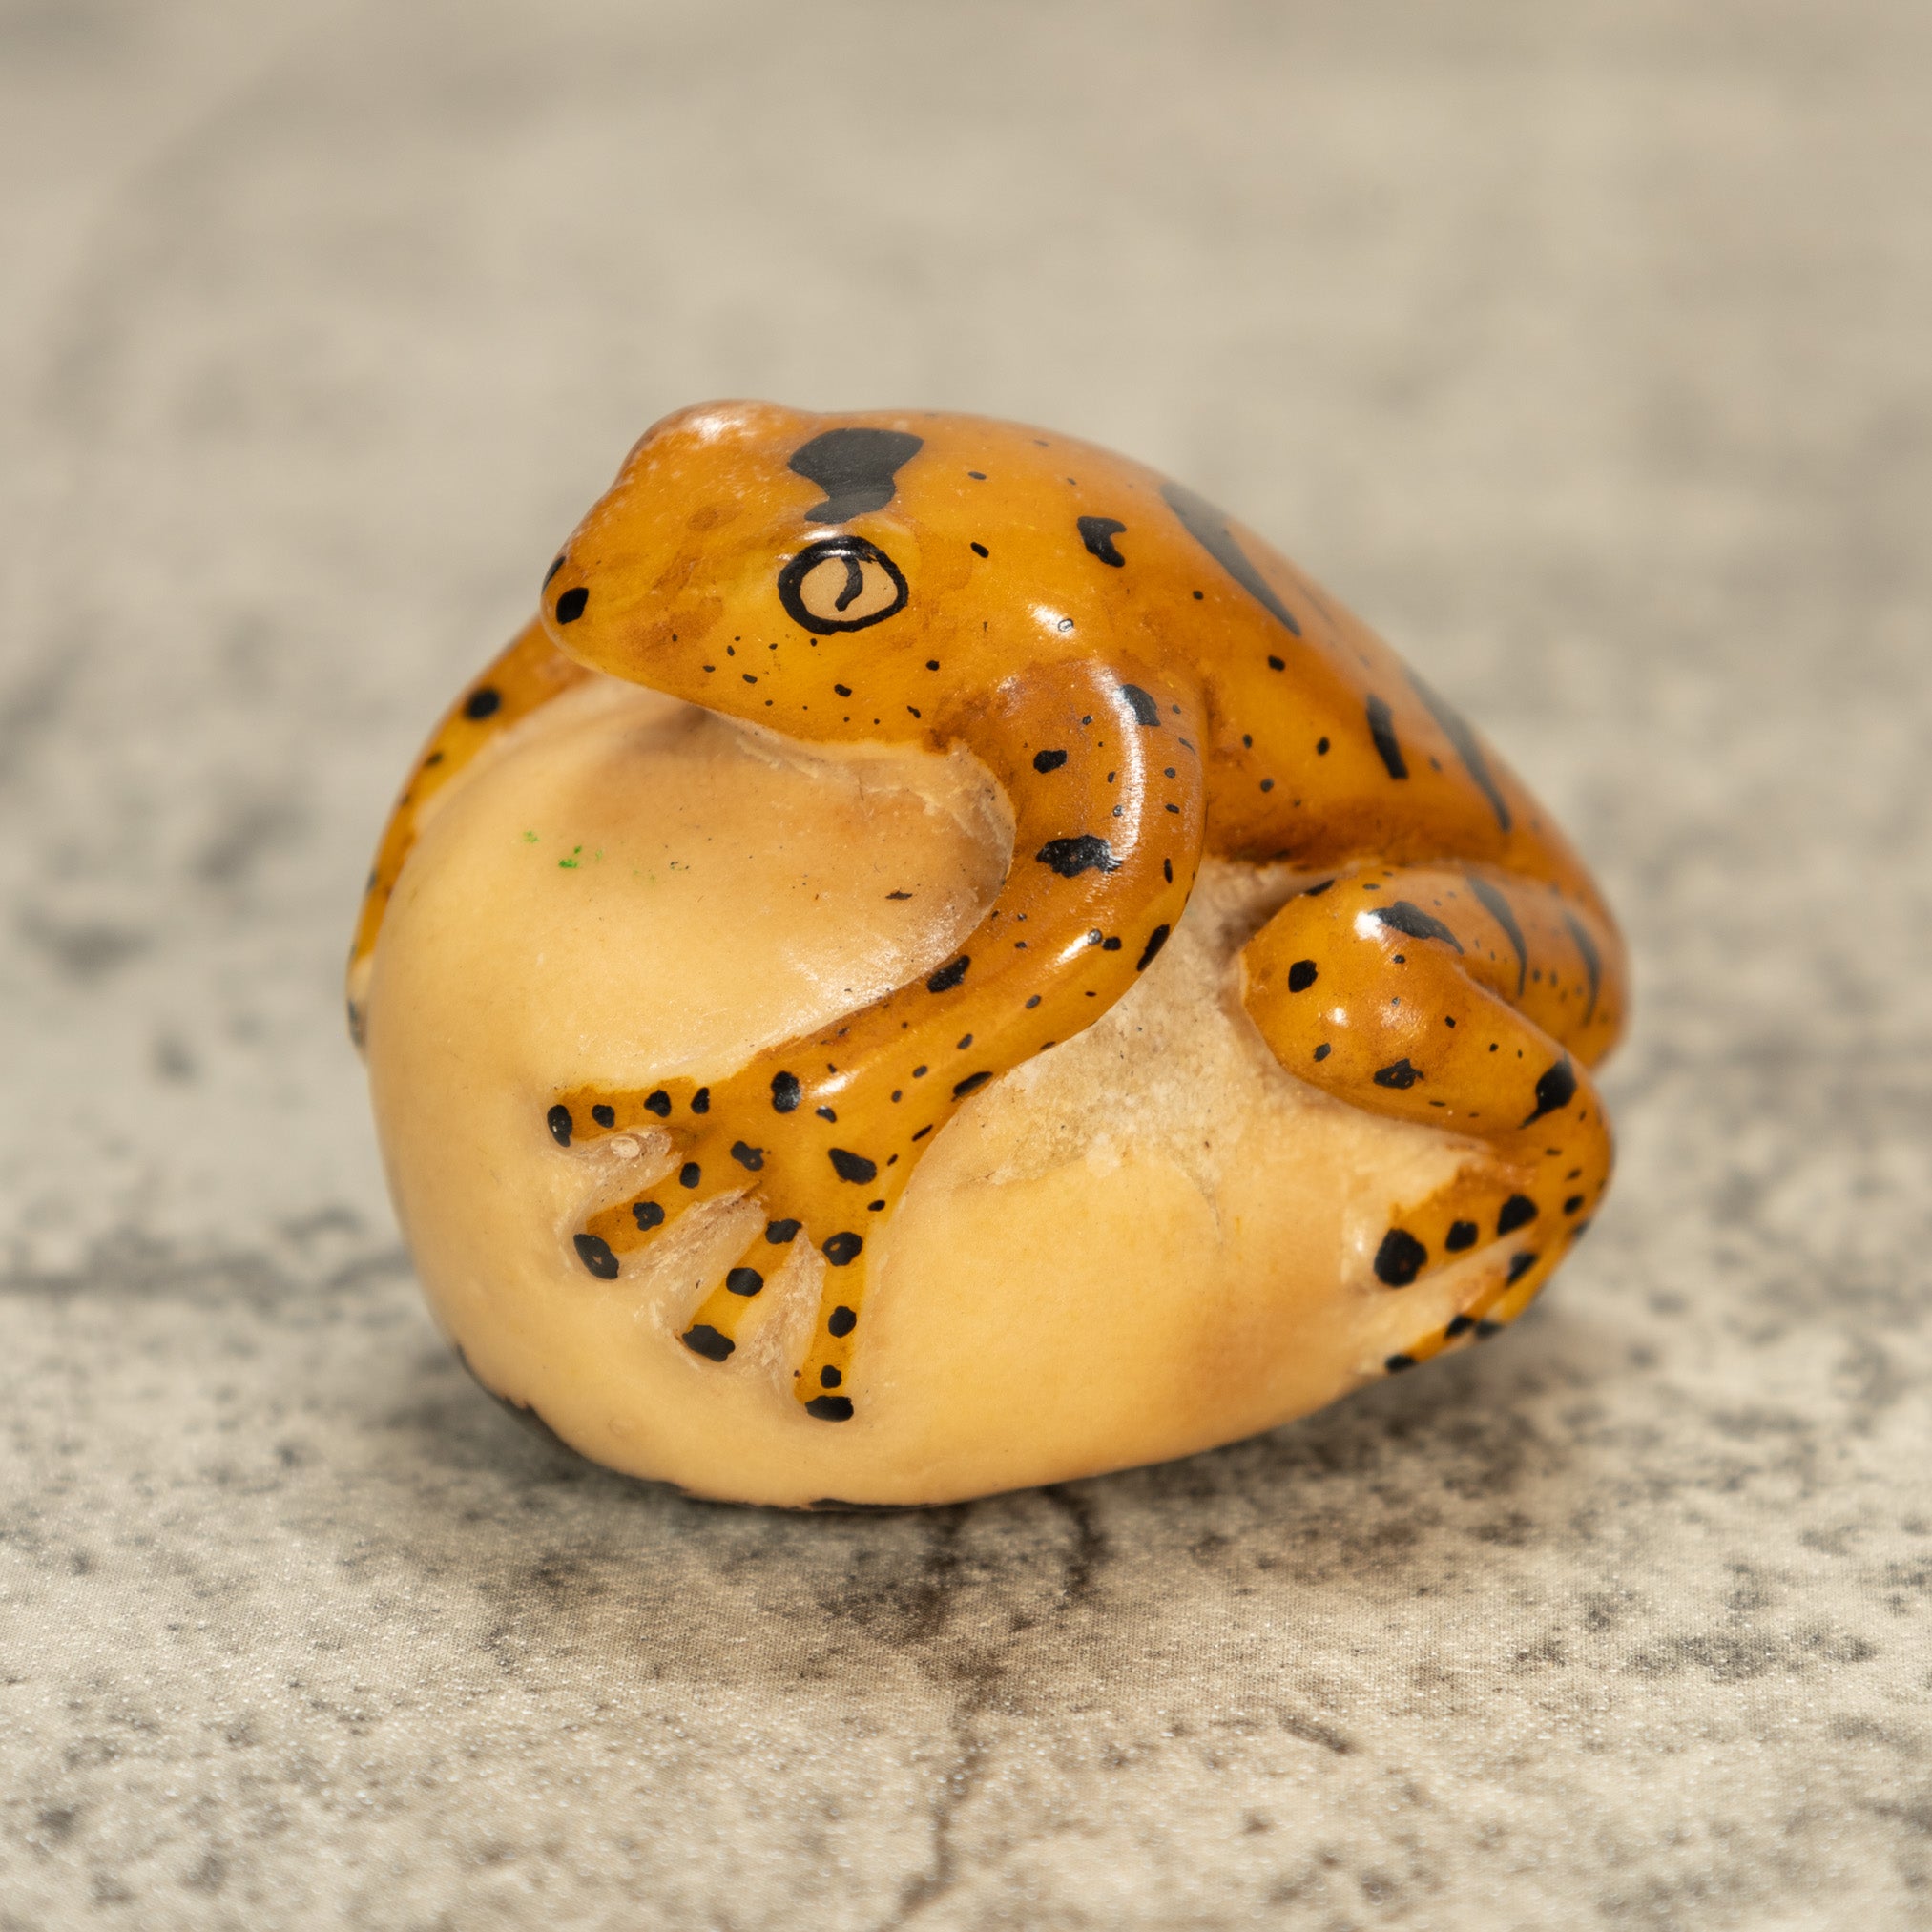 Poison Dart Frog Tagua Nut Carving